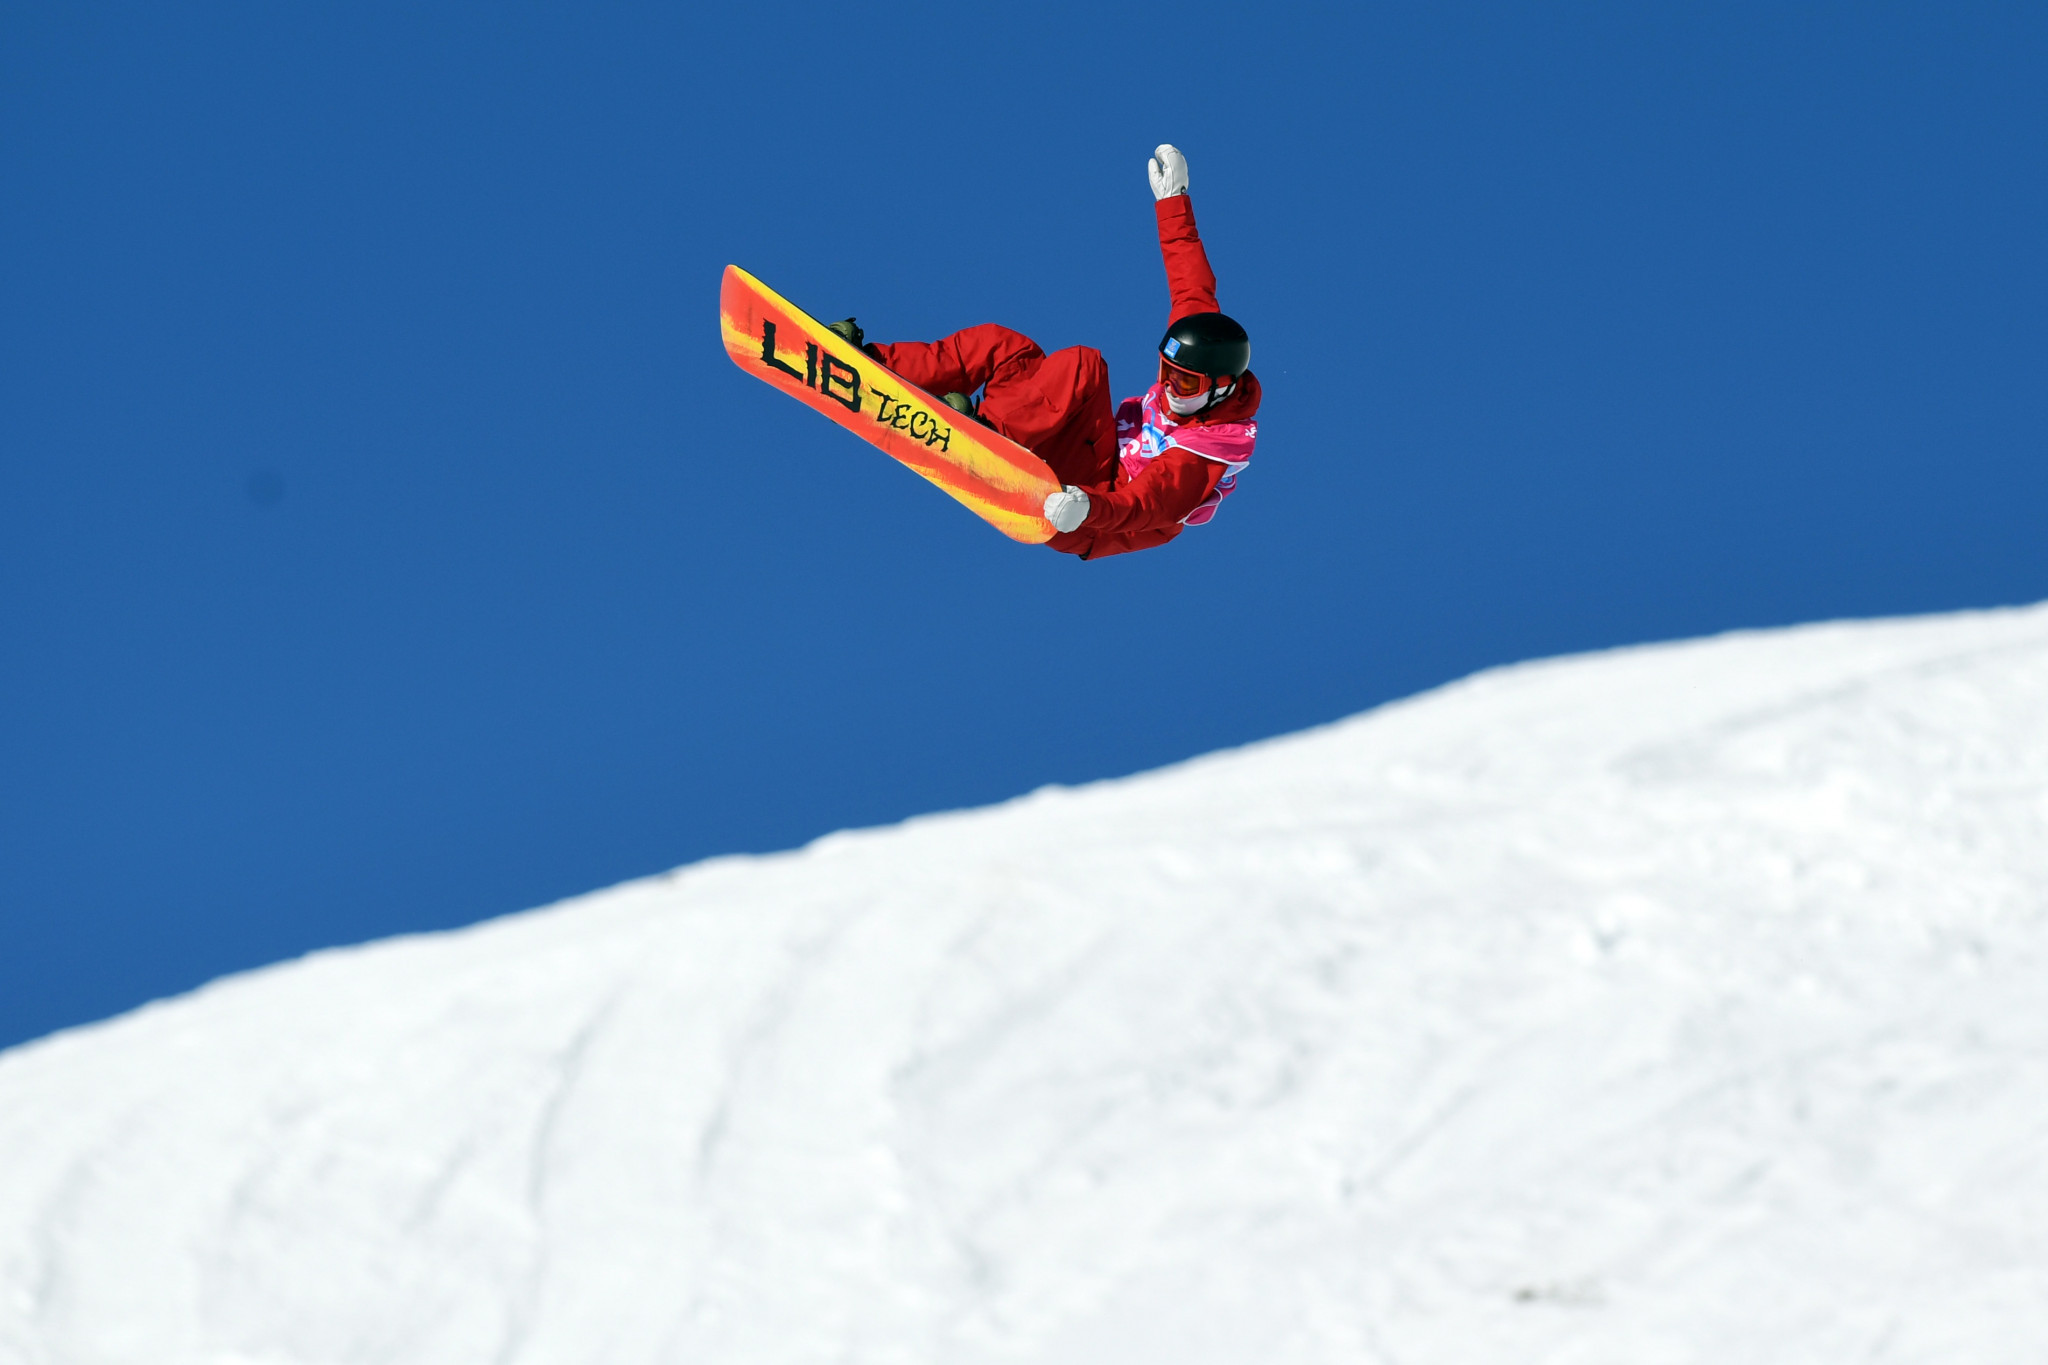 Corvatsch steps in to host season-ending slopestyle Snowboard World Cup